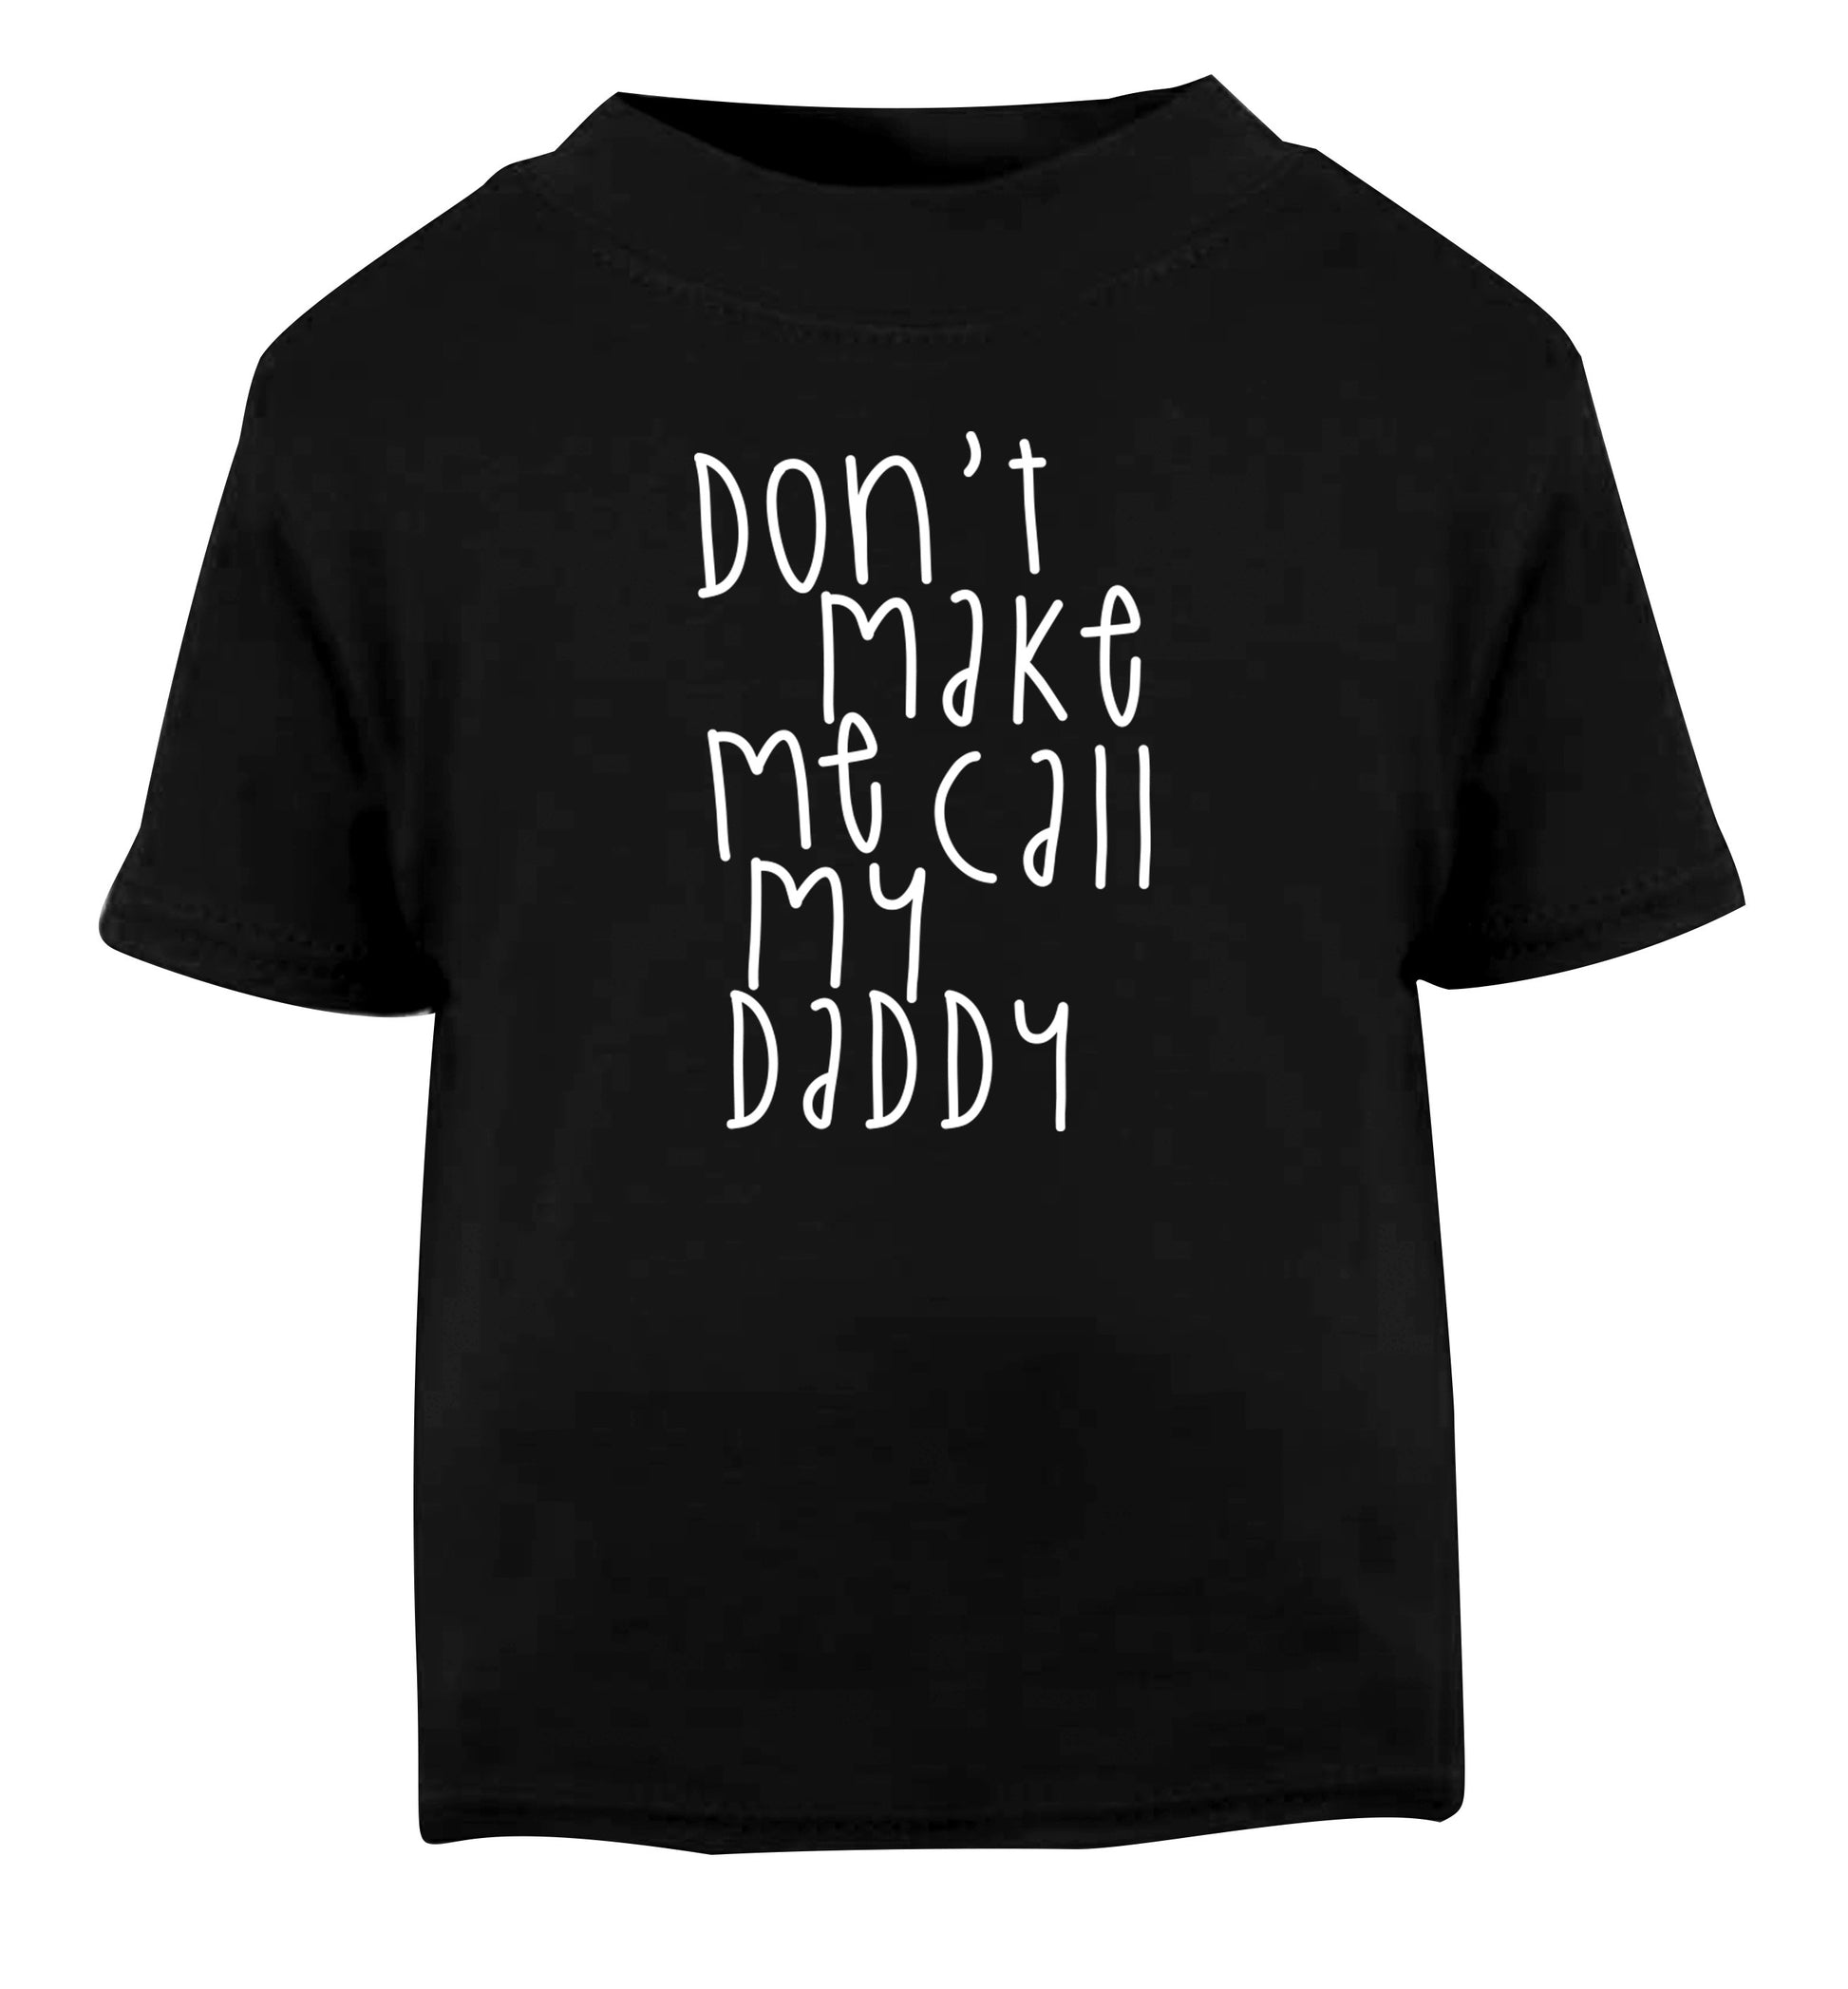 Don't make me call my daddy Black Baby Toddler Tshirt 2 years